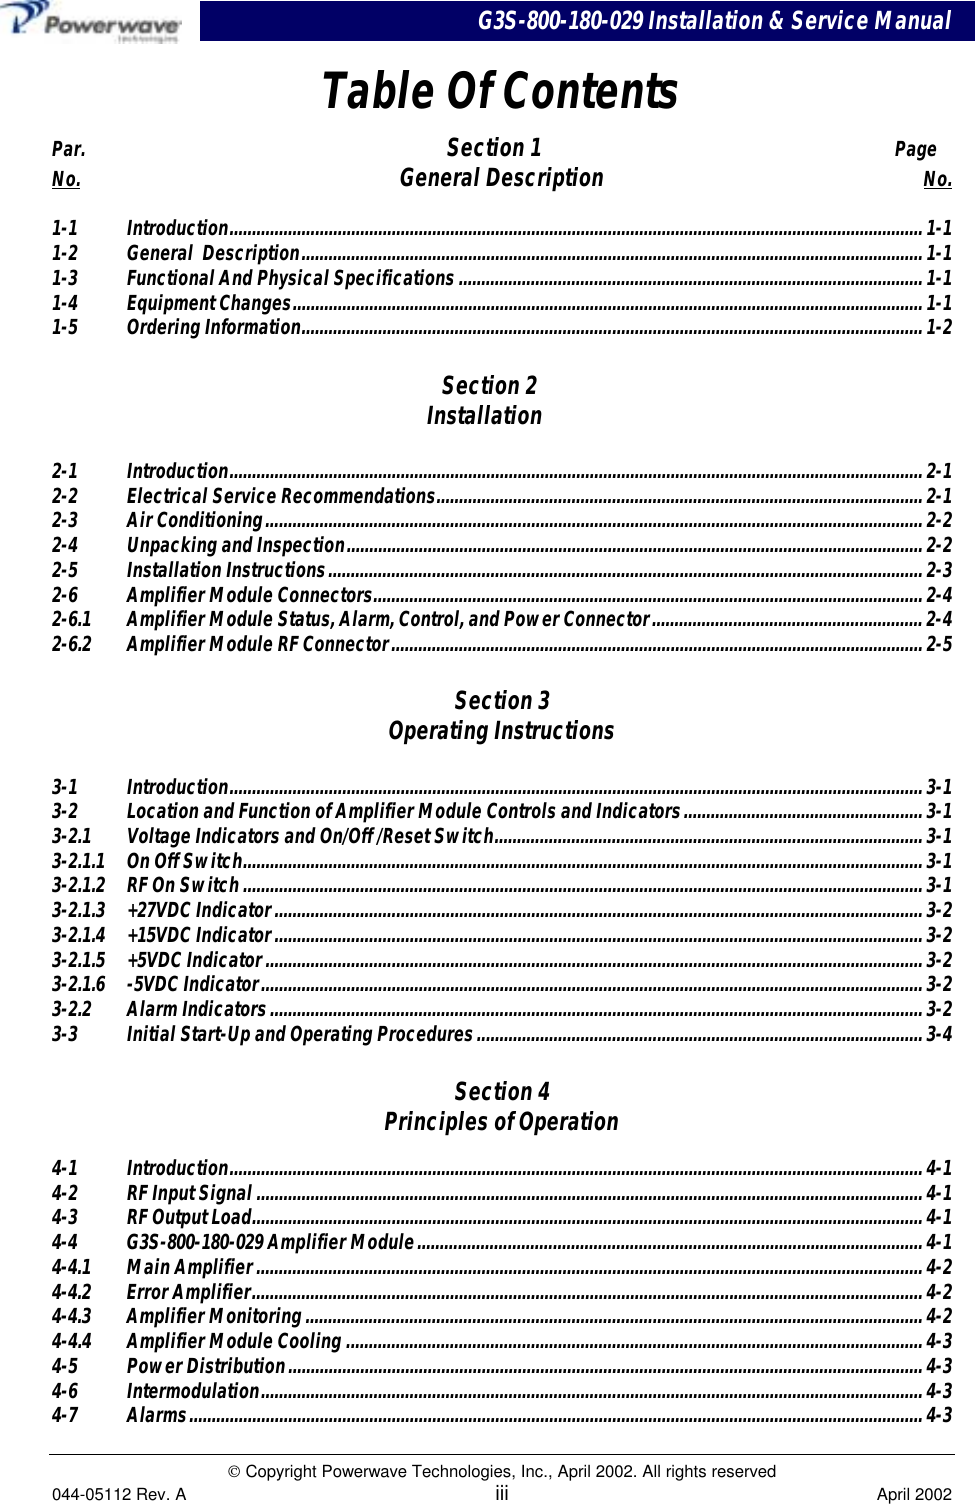 G3S-800-180-029 Installation &amp; Service Manual Copyright Powerwave Technologies, Inc., April 2002. All rights reserved044-05112 Rev. A iii April 2002Table Of ContentsPar.     Section 1     PageNo. General Description No.1-1 Introduction..........................................................................................................................................................1-11-2 General  Description..........................................................................................................................................1-11-3 Functional And Physical Specifications.......................................................................................................1-11-4 Equipment Changes............................................................................................................................................1-11-5 Ordering Information.......................................................................................................................................... 1-2Section 2Installation2-1 Introduction..........................................................................................................................................................2-12-2 Electrical Service Recommendations............................................................................................................ 2-12-3 Air Conditioning..................................................................................................................................................2-22-4  Unpacking and Inspection................................................................................................................................ 2-22-5 Installation Instructions....................................................................................................................................2-32-6 Amplifier Module Connectors.......................................................................................................................... 2-42-6.1 Amplifier Module Status, Alarm, Control, and Power Connector............................................................ 2-42-6.2 Amplifier Module RF Connector...................................................................................................................... 2-5Section 3Operating Instructions3-1 Introduction..........................................................................................................................................................3-13-2 Location and Function of Amplifier Module Controls and Indicators..................................................... 3-13-2.1 Voltage Indicators and On/Off /Reset Switch............................................................................................... 3-13-2.1.1 On Off Switch.......................................................................................................................................................3-13-2.1.2 RF On Switch.......................................................................................................................................................3-13-2.1.3 +27VDC Indicator................................................................................................................................................3-23-2.1.4 +15VDC Indicator................................................................................................................................................3-23-2.1.5 +5VDC Indicator..................................................................................................................................................3-23-2.1.6 -5VDC Indicator................................................................................................................................................... 3-23-2.2 Alarm Indicators.................................................................................................................................................3-23-3 Initial Start-Up and Operating Procedures...................................................................................................3-4Section 4Principles of Operation4-1 Introduction..........................................................................................................................................................4-14-2 RF Input Signal ....................................................................................................................................................4-14-3 RF Output Load..................................................................................................................................................... 4-14-4 G3S-800-180-029 Amplifier Module................................................................................................................4-14-4.1 Main Amplifier.................................................................................................................................................... 4-24-4.2 Error Amplifier.....................................................................................................................................................4-24-4.3 Amplifier Monitoring.........................................................................................................................................4-24-4.4 Amplifier Module Cooling ................................................................................................................................4-34-5 Power Distribution.............................................................................................................................................4-34-6 Intermodulation...................................................................................................................................................4-34-7 Alarms...................................................................................................................................................................4-3